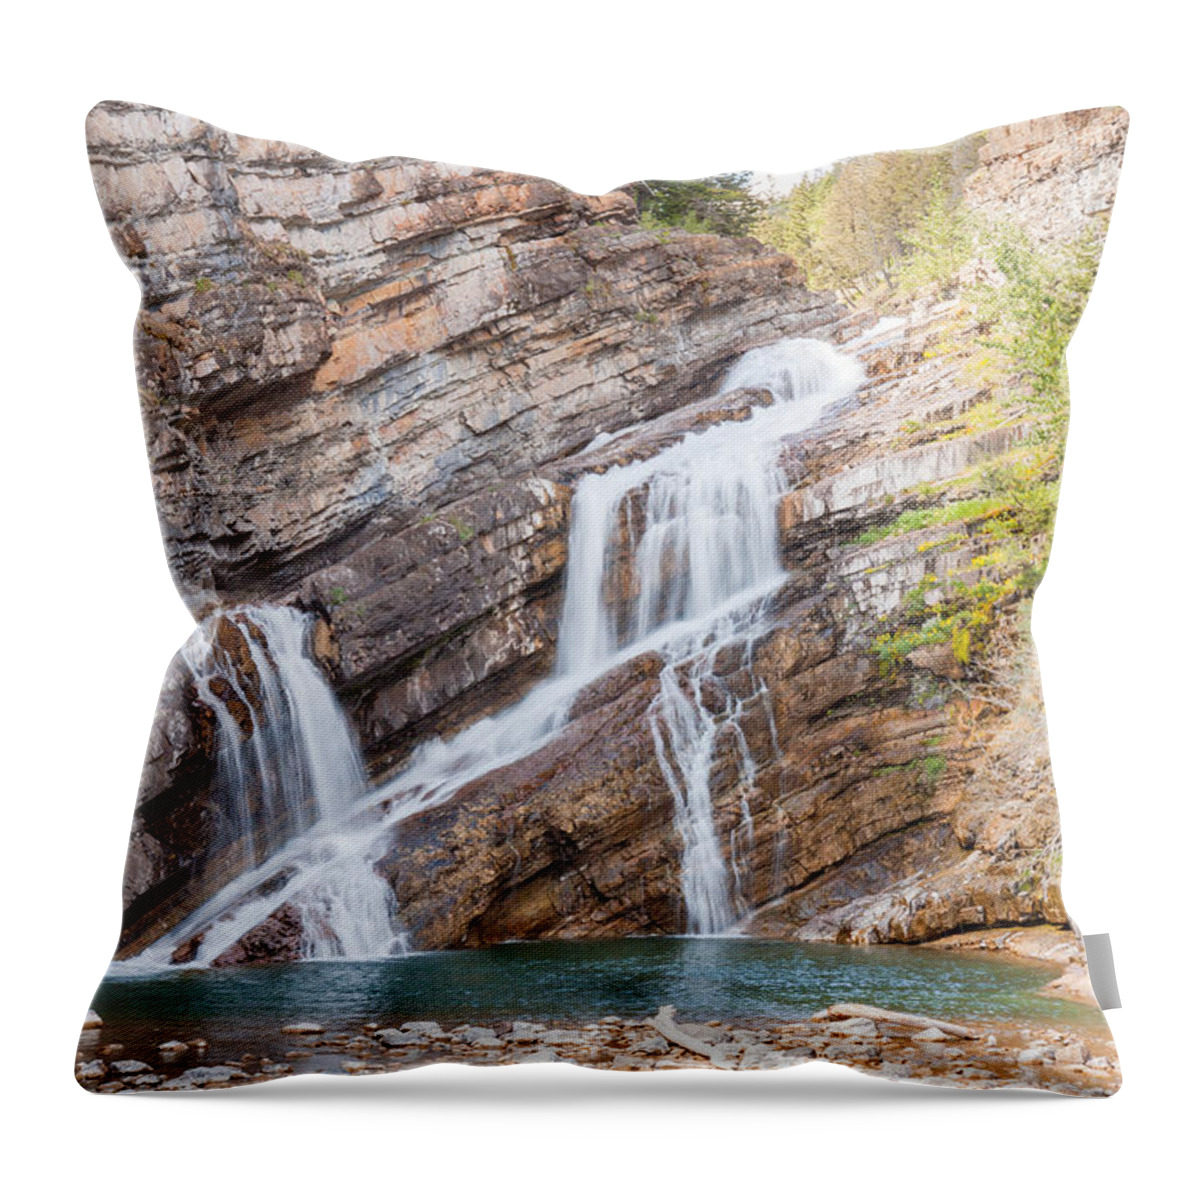 Cameron Falls Throw Pillow featuring the photograph Zigzag Waterfall by John M Bailey